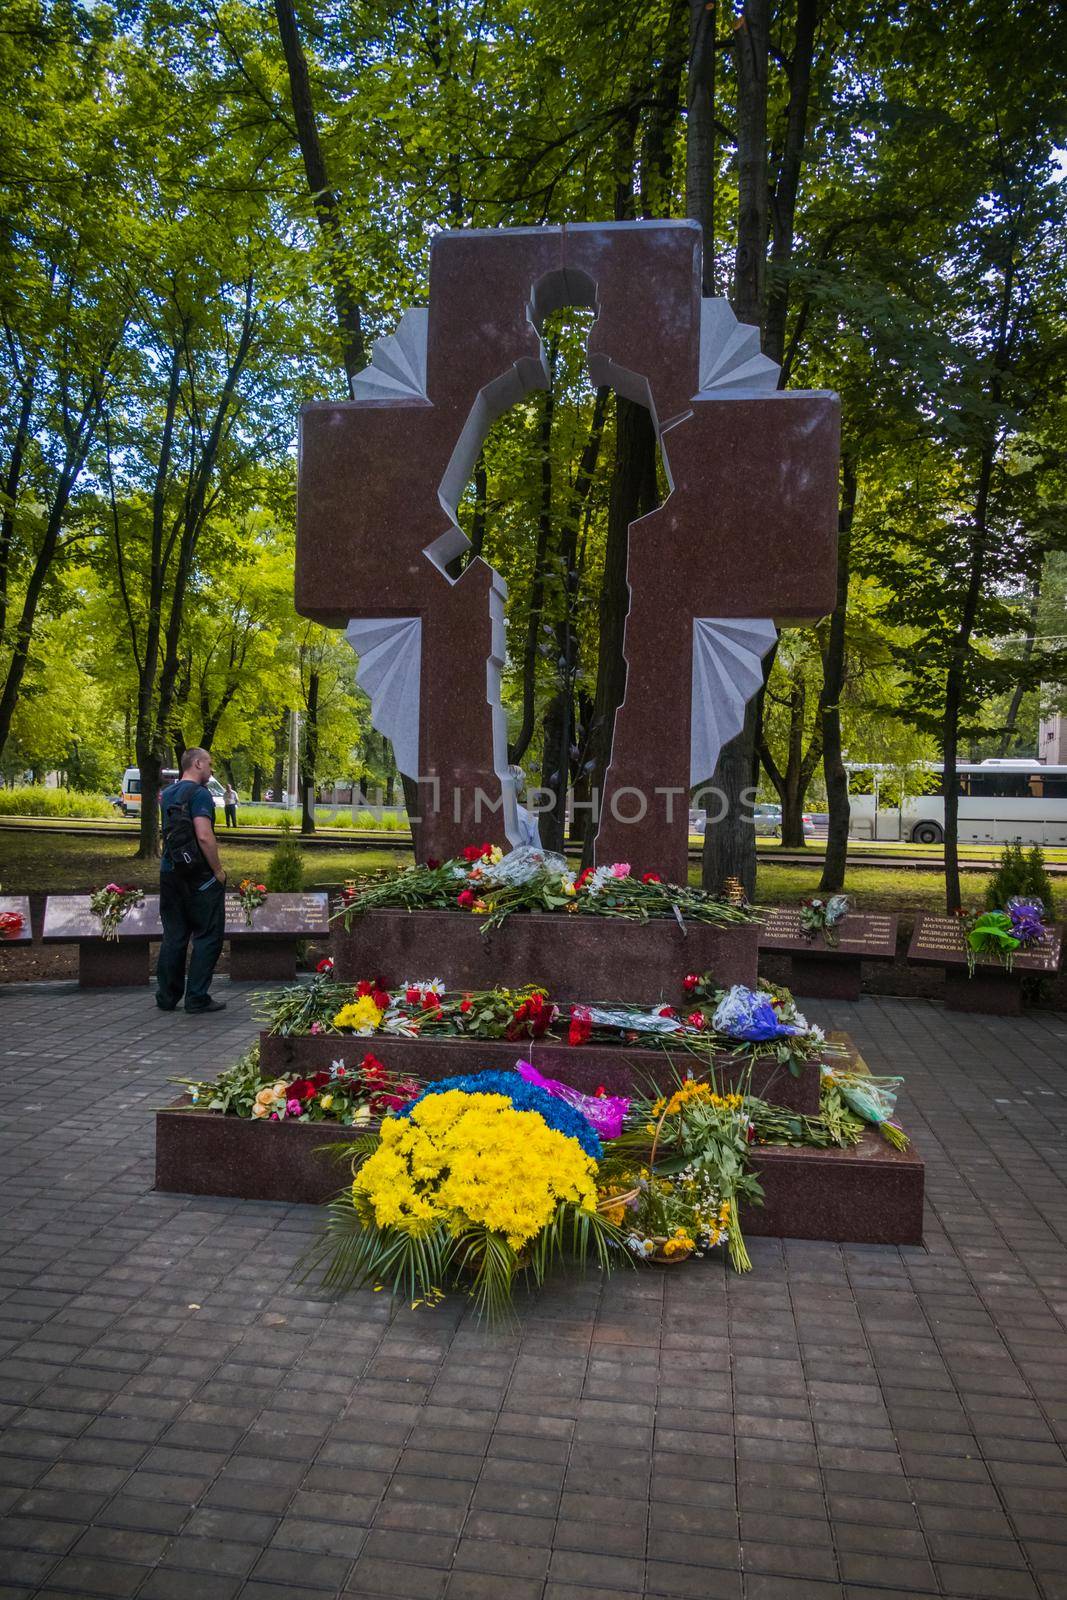 Krivoy Rog, Ukraine - may 18, 2020: A man with flowers near the memorial to fallen soldiers - defenders of Ukraine while honoring the memory of those killed in the battles for Debaltseve. by mosfet_ua